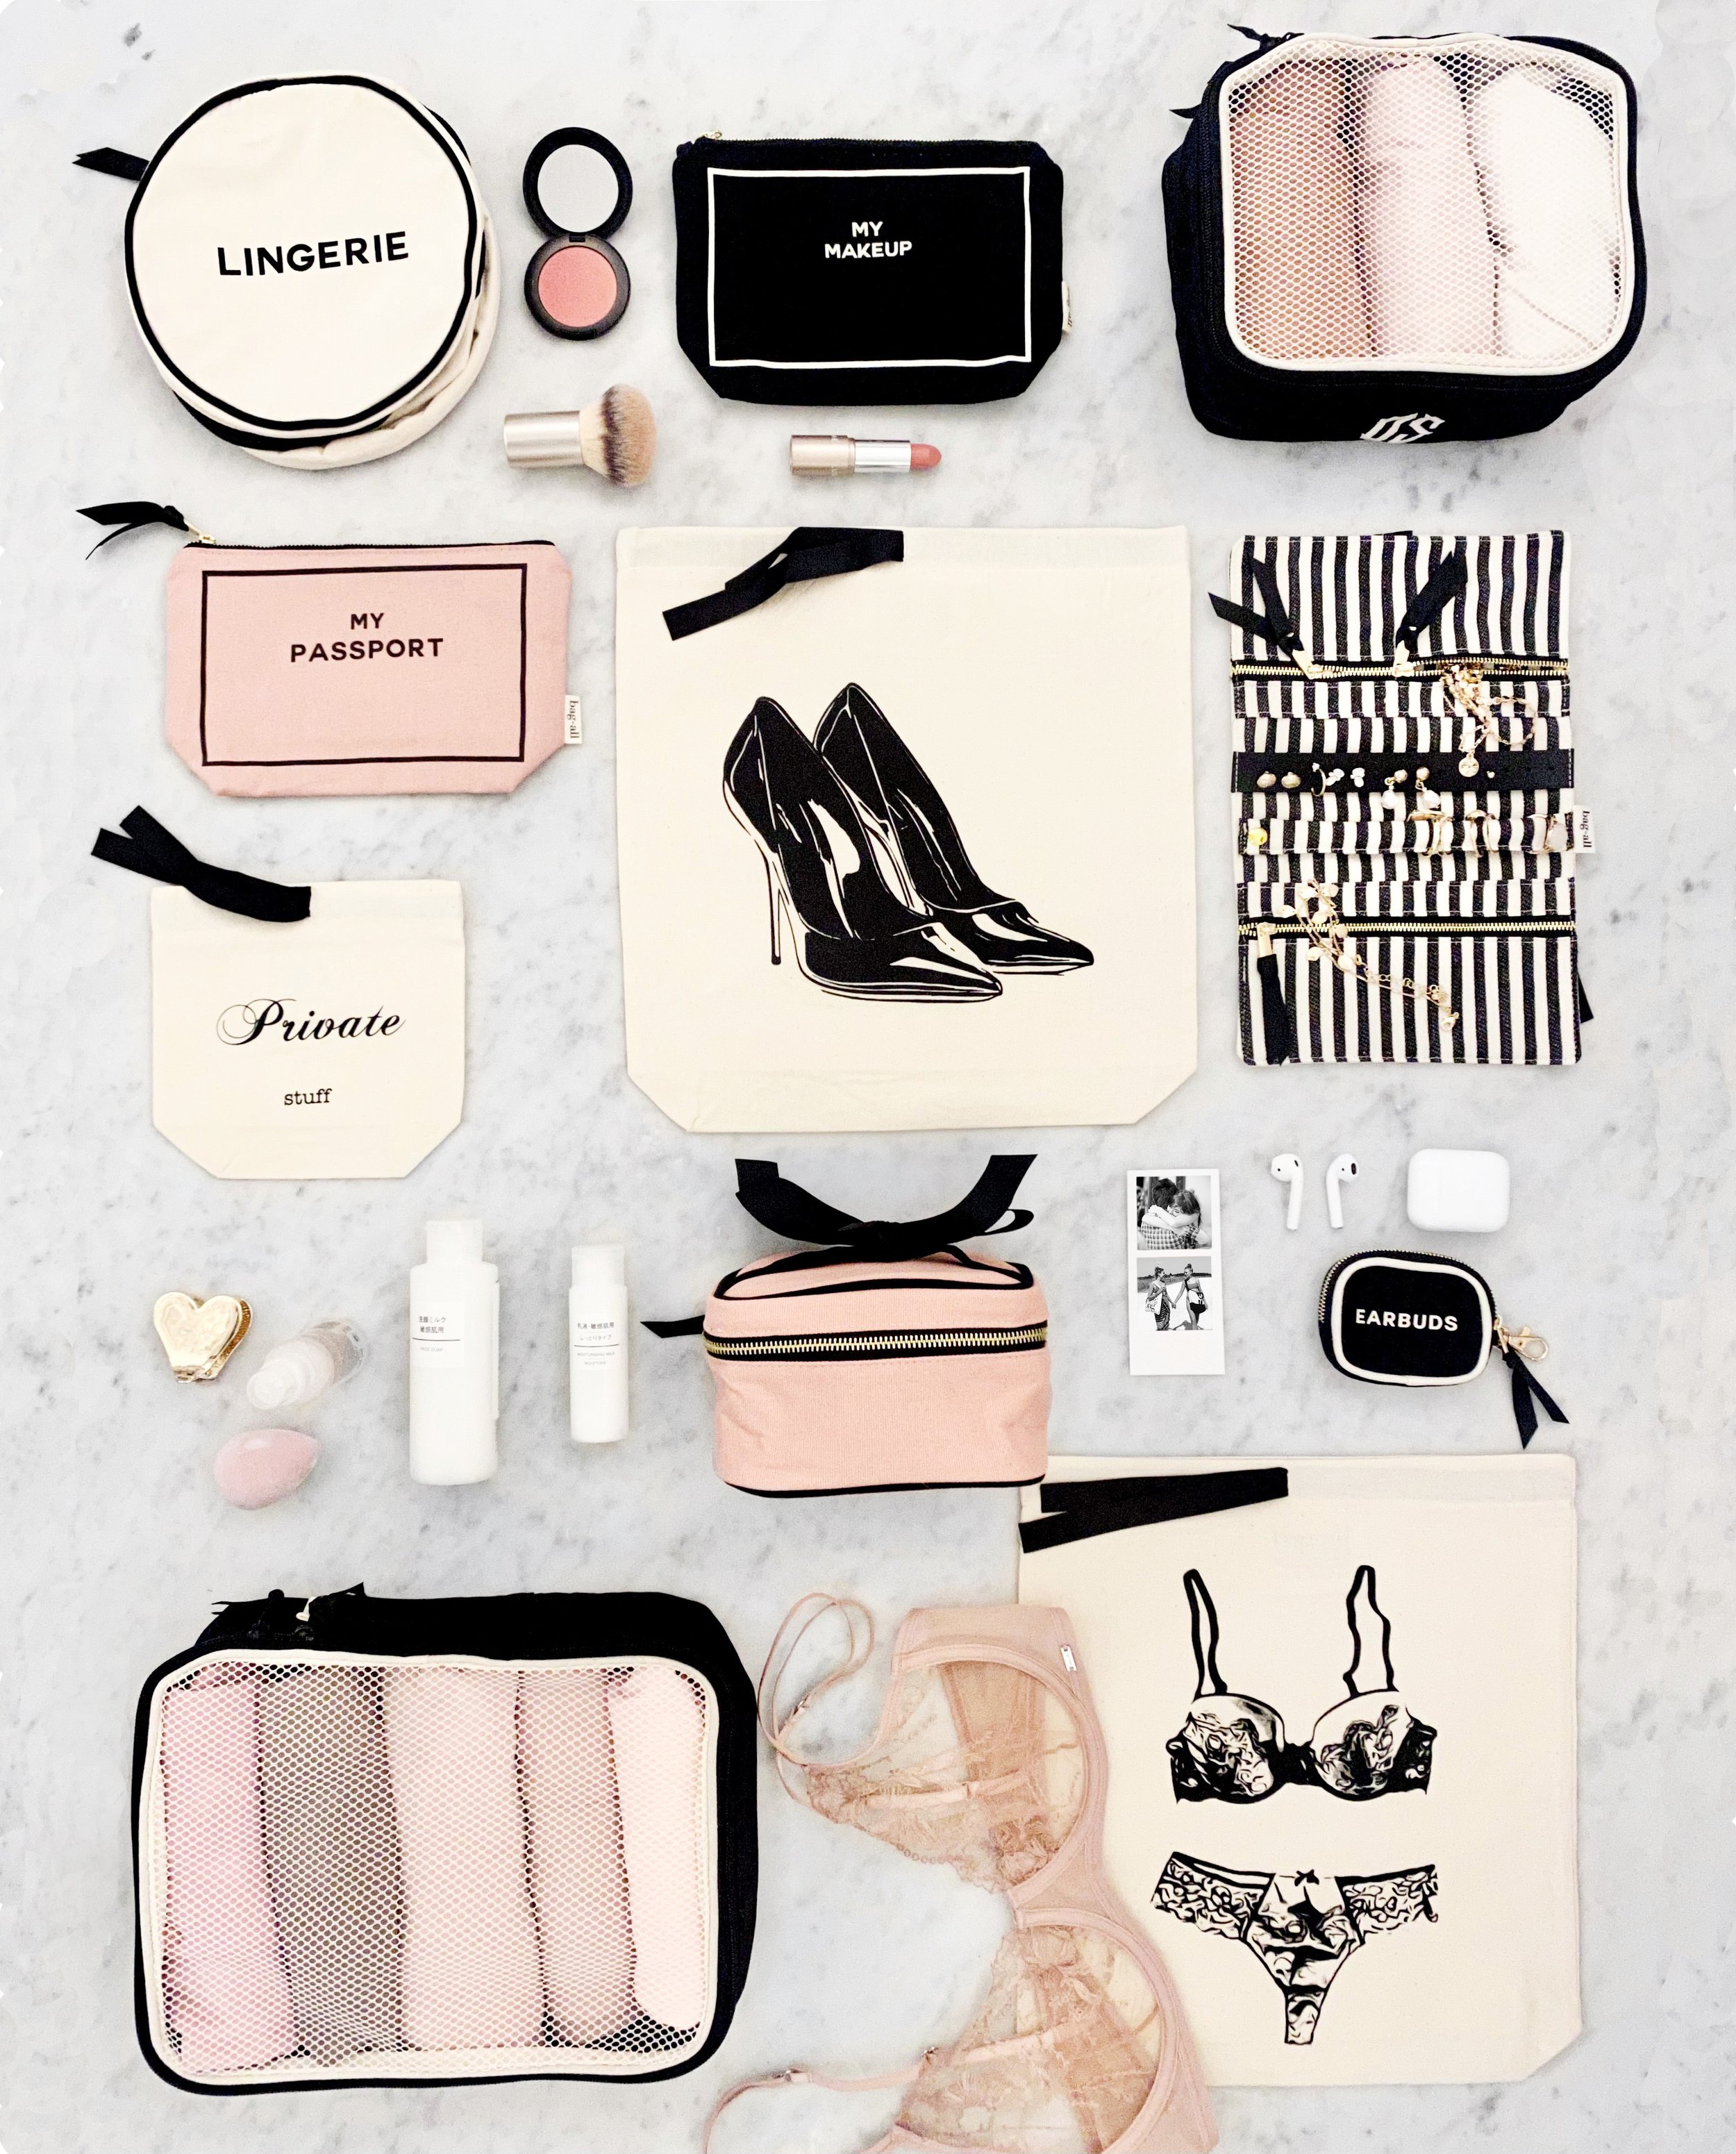 Bag-all high heel pumps shoe bag, round lingerie case, passport case pink, provate small bag, packing cubes,lace lingerie bag, earpods case, jewelry case bling bling packing cubes black, blank beauty box mini pink, makeup